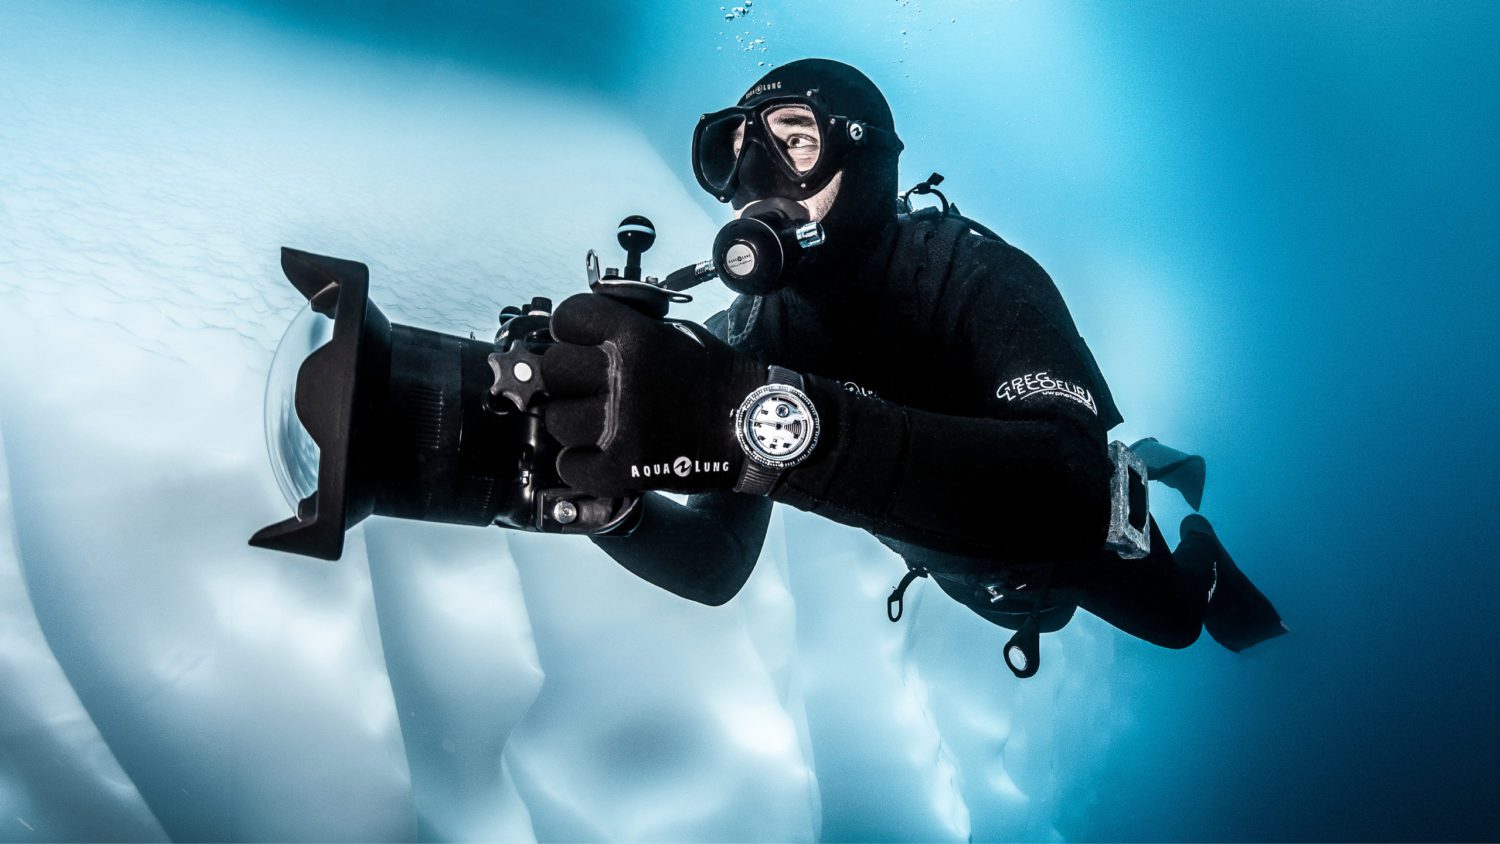 Faithful to the technical demands of diving watches, RESERVOIR Hydrosphere offers an original version of these masters of time. On the dial is a single hand for innovative diving instruments.